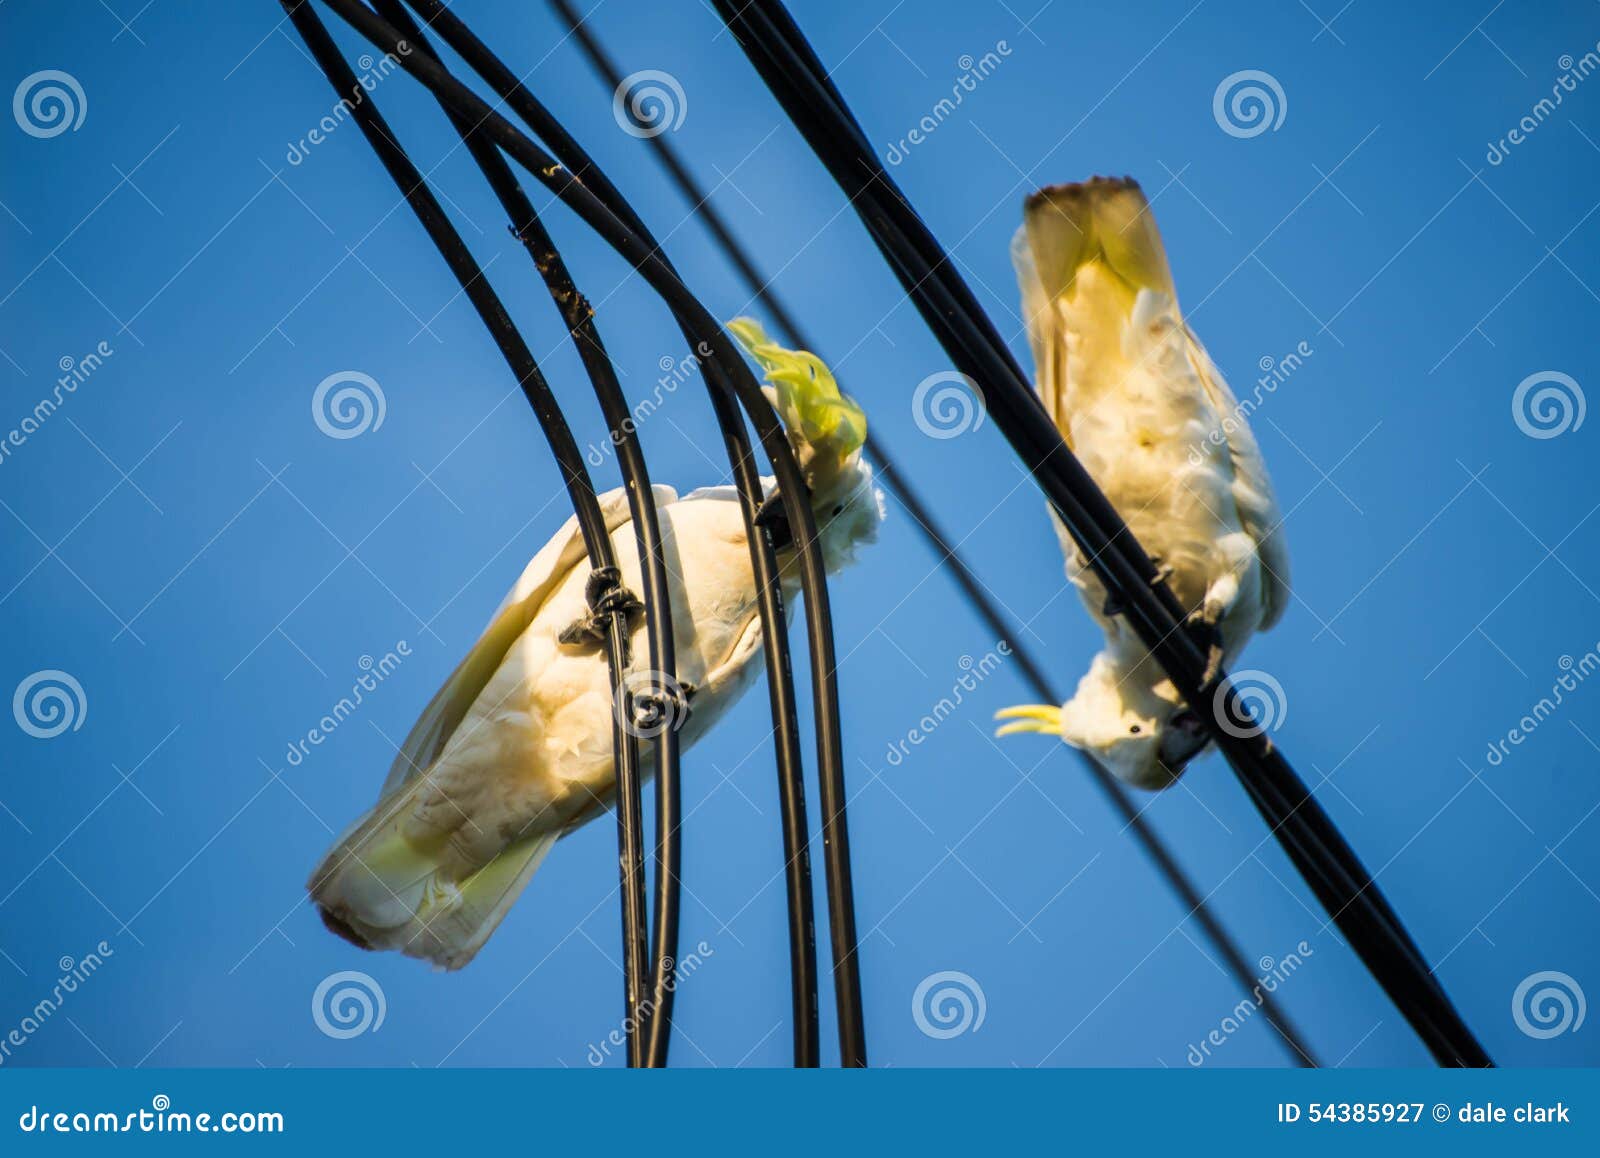 cockatoos chewing on electrical cable